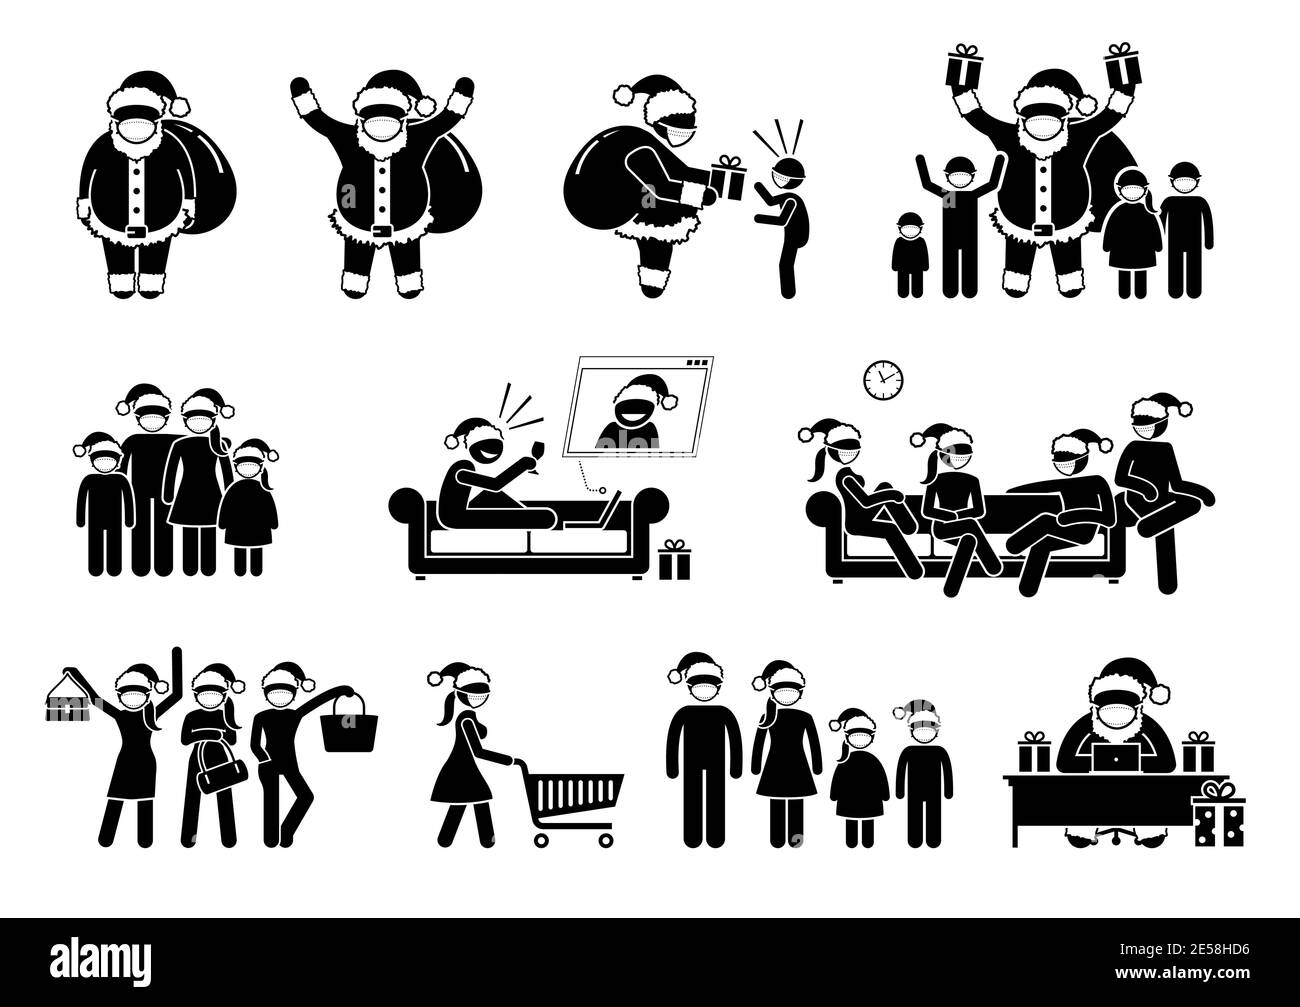 Santa Claus and people wearing face mask during pandemic on Christmas. Vector illustrations of Santa Claus, family, and friends celebrating Merry Chri Stock Vector